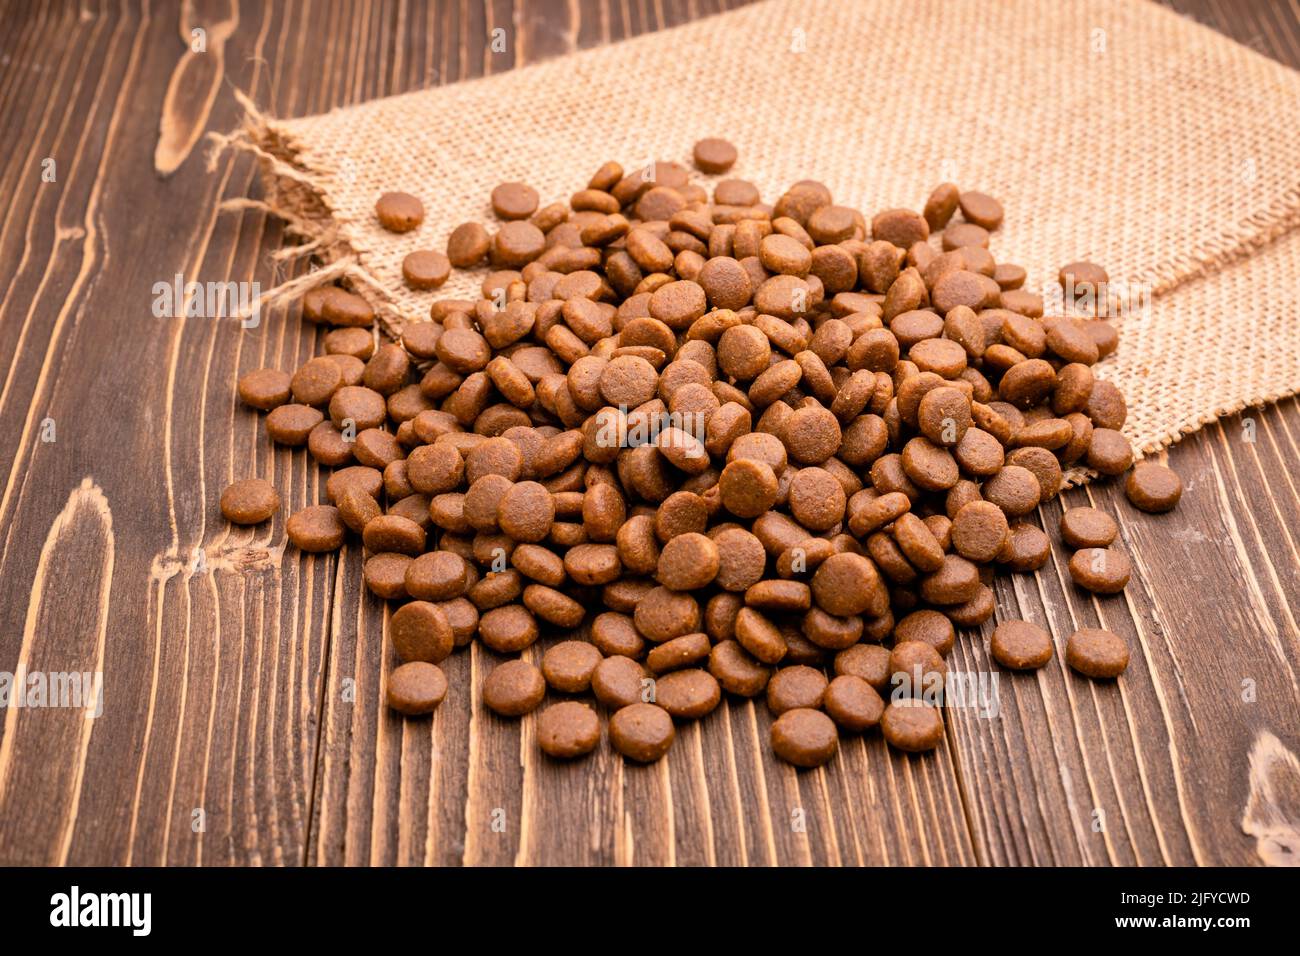 Pile of dog food on brown wooden plank background Stock Photo